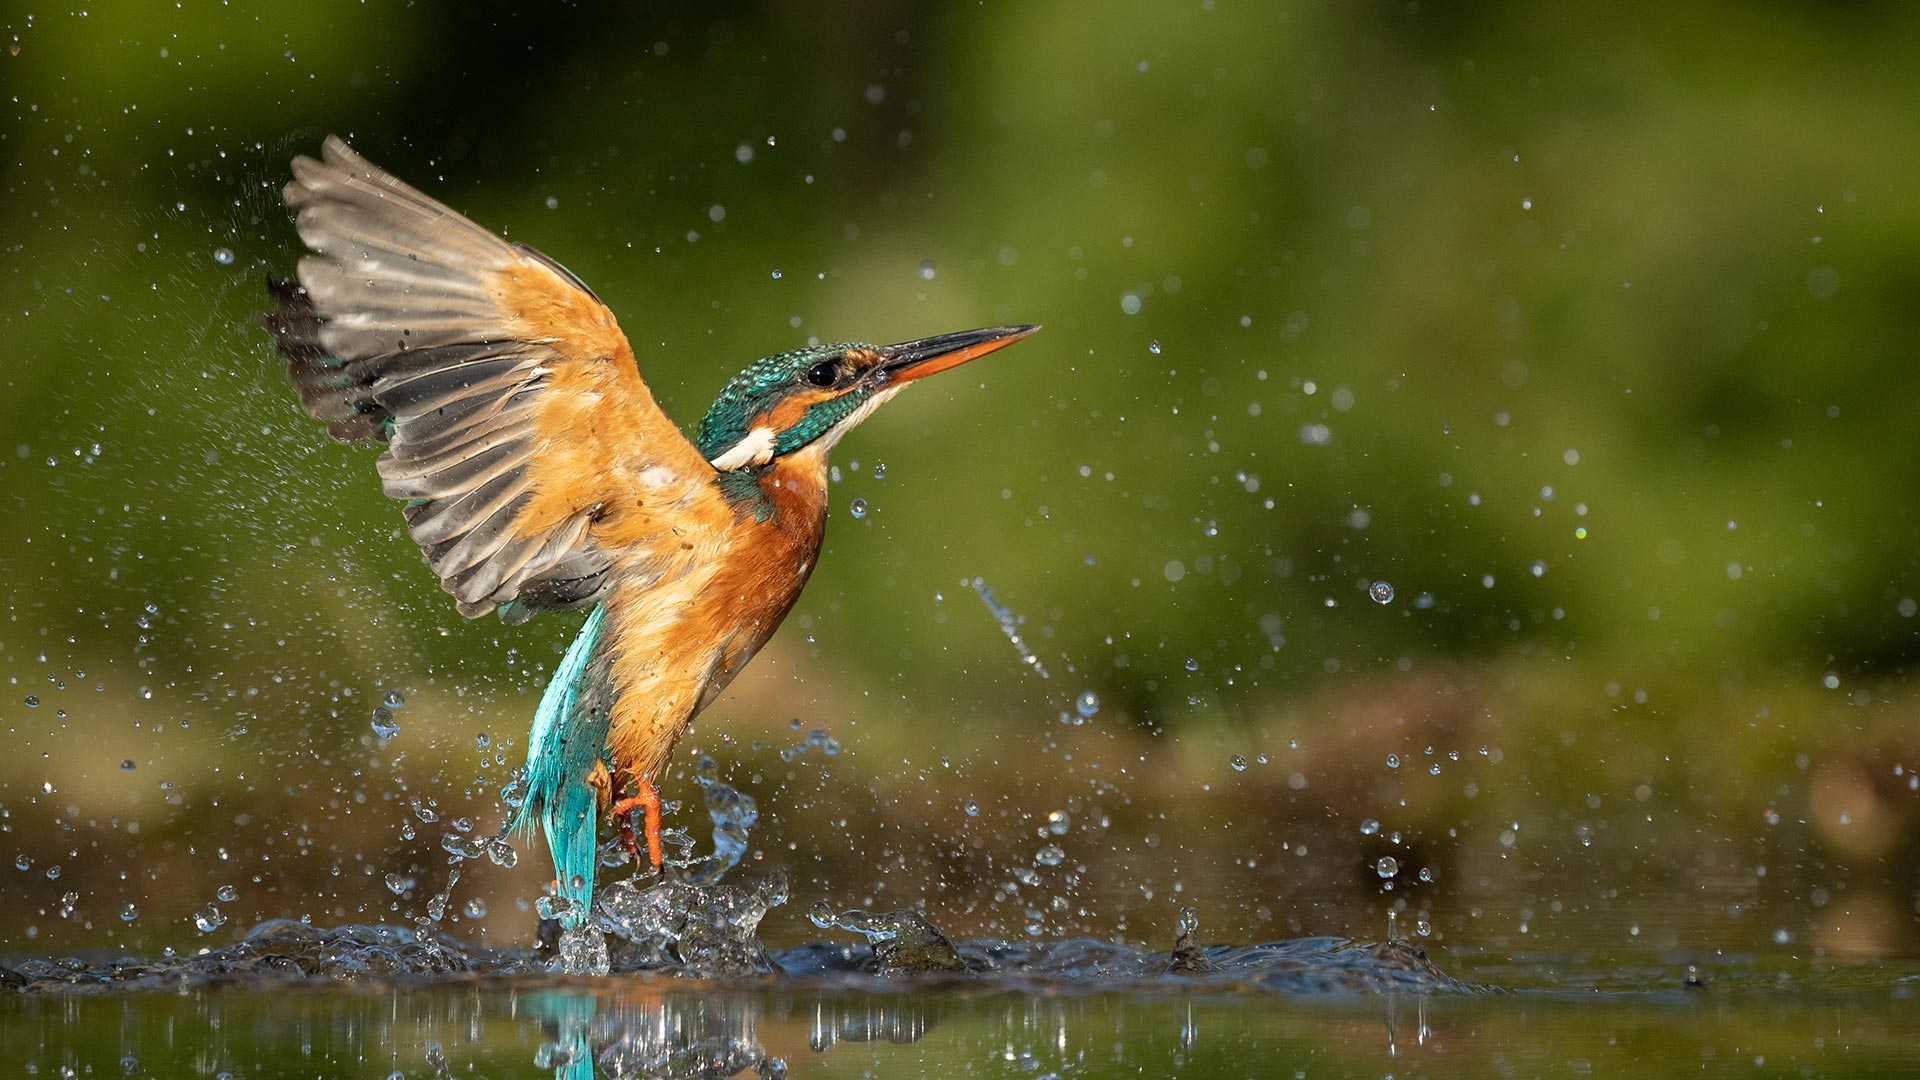 Female kingfisher emerging from water